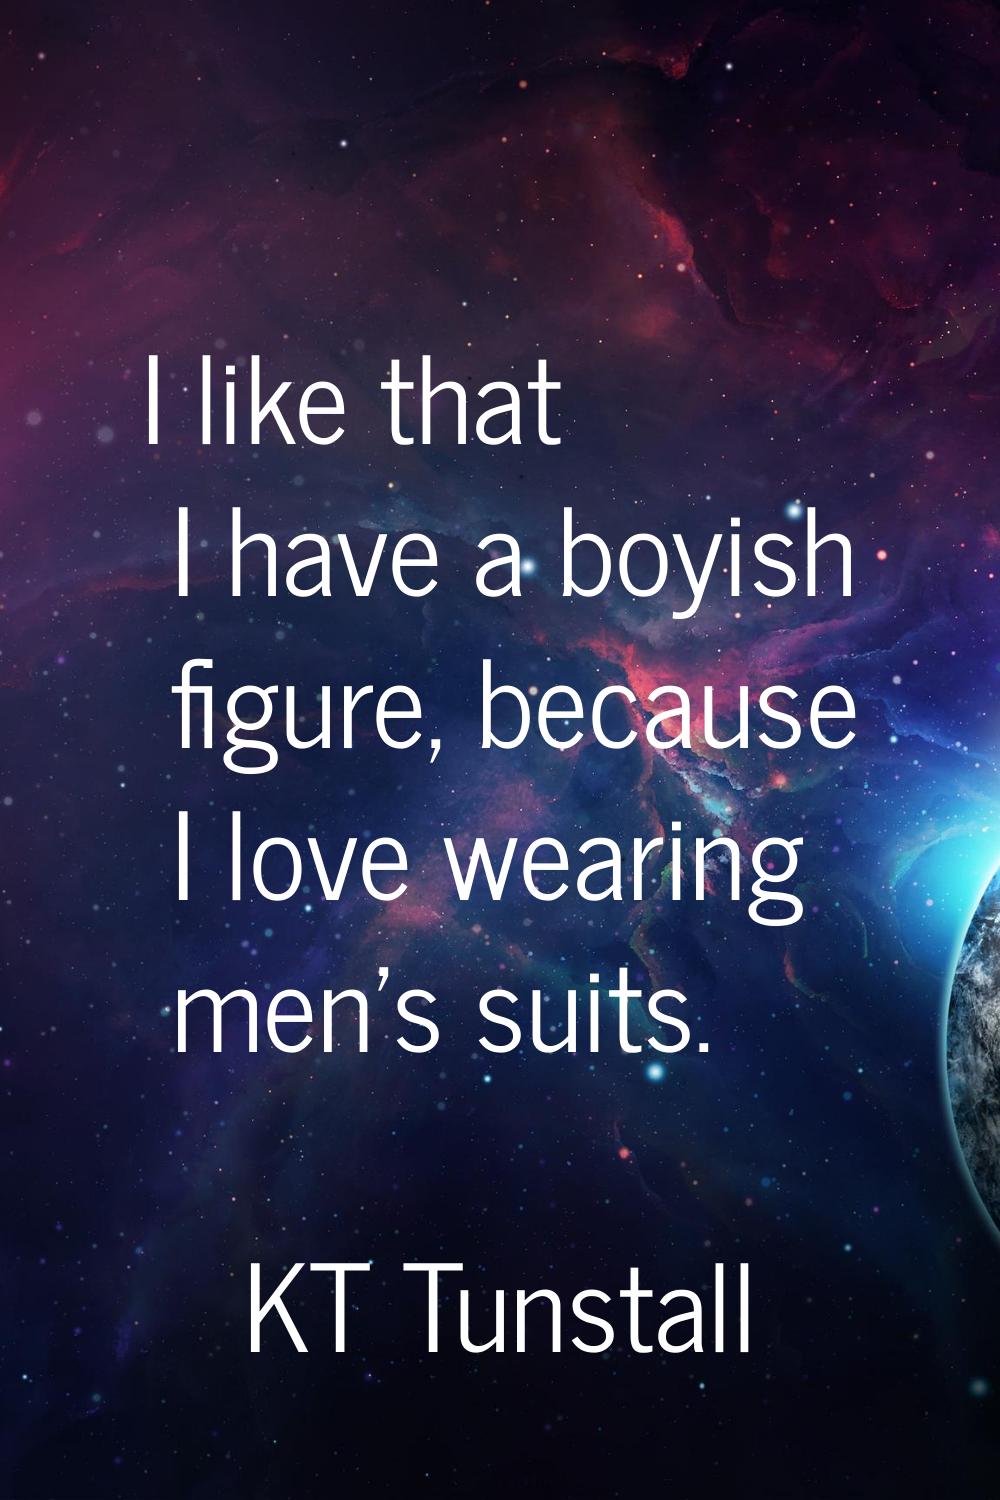 I like that I have a boyish figure, because I love wearing men's suits.